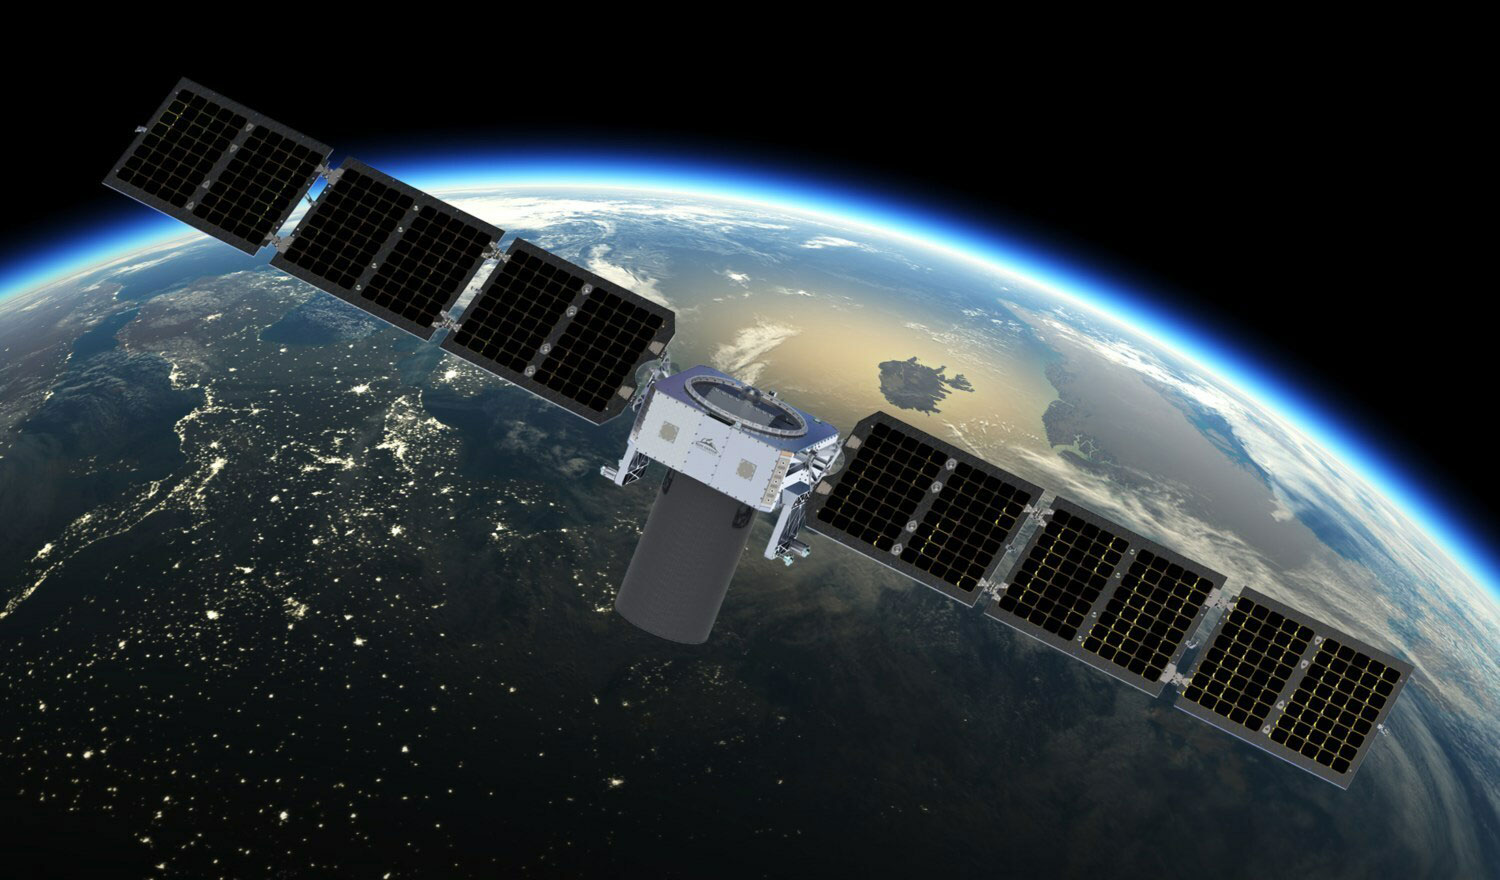 The Blackjack program is a demonstration of cost-effective reconnaissance satellites that will operate in low Earth orbit.